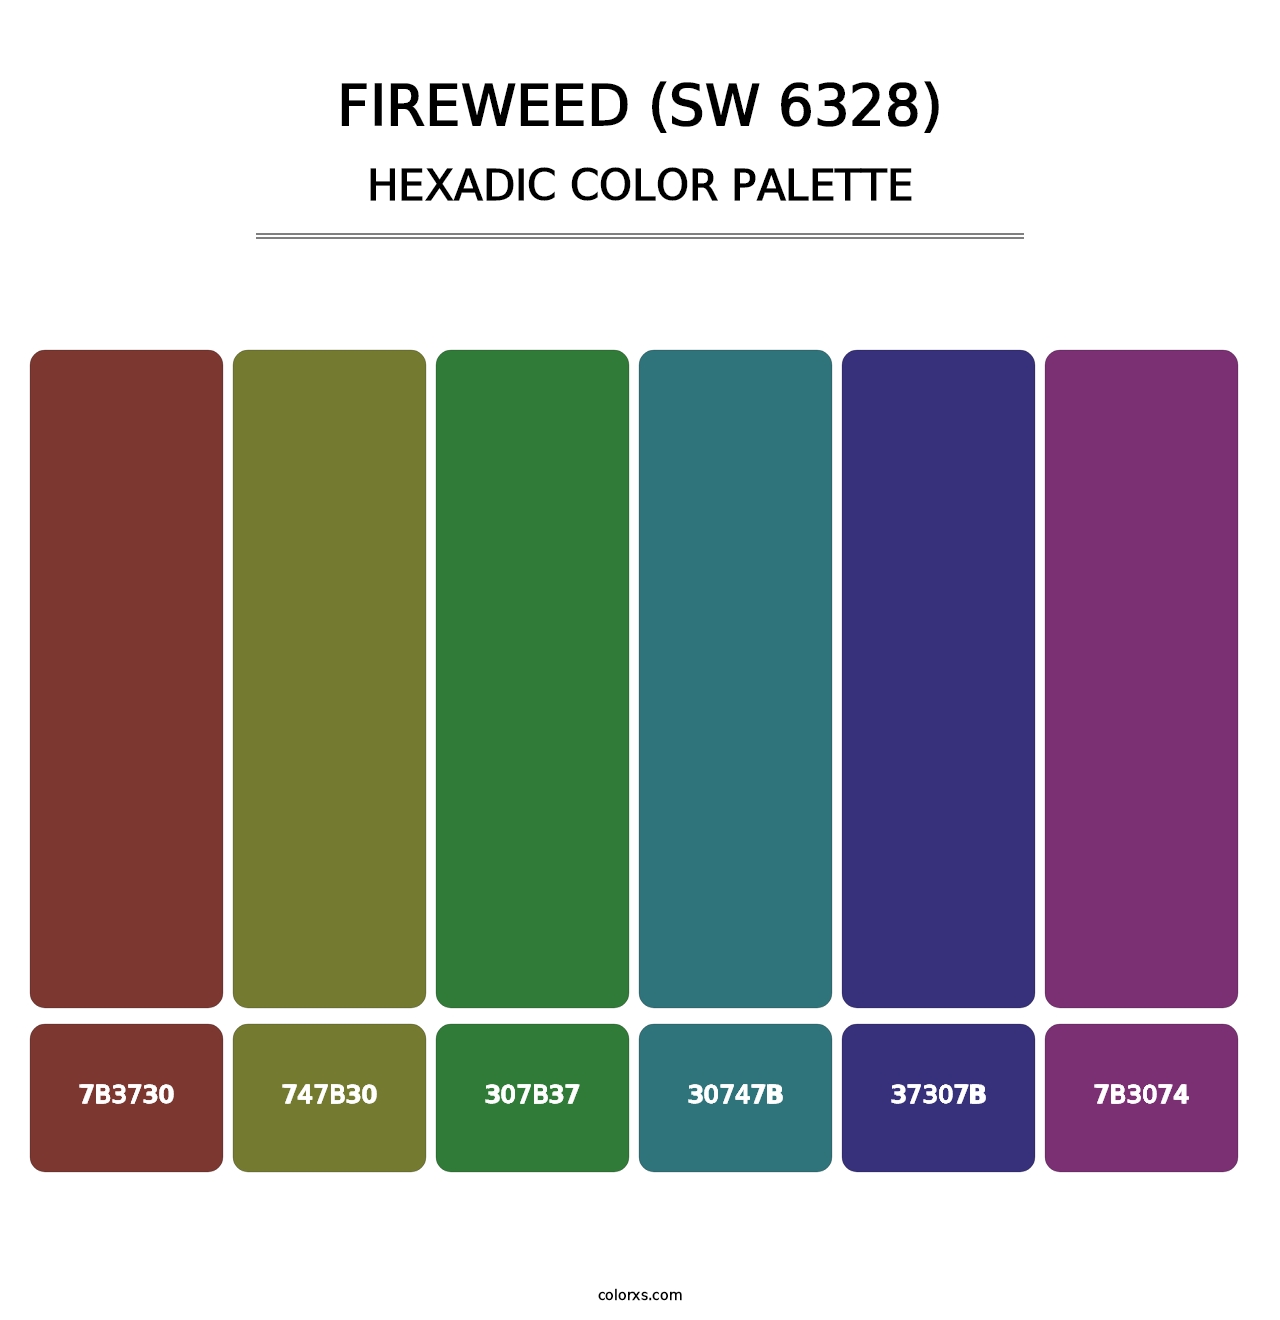 Fireweed (SW 6328) - Hexadic Color Palette